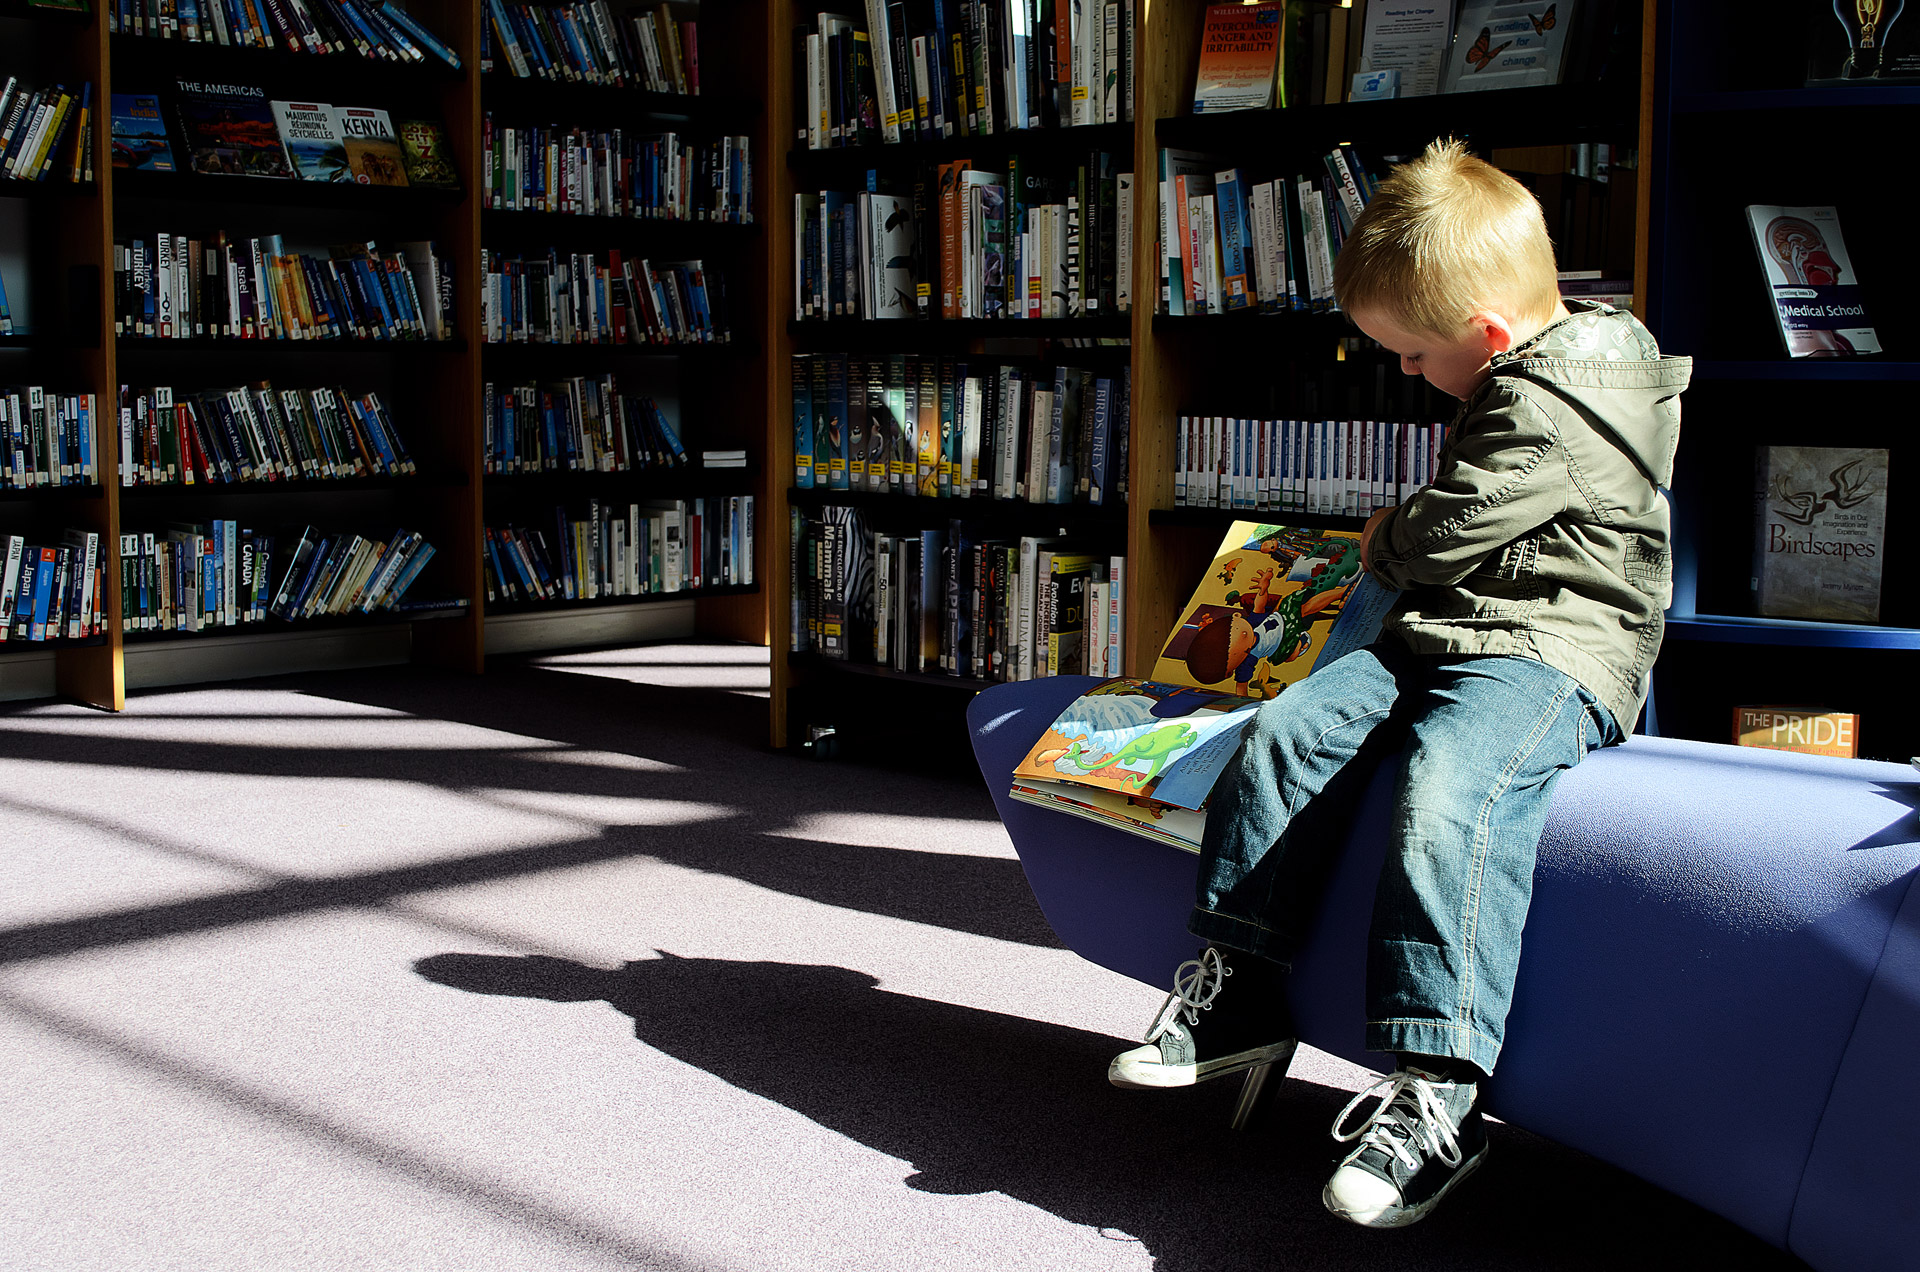 Local media criticizes library for not addressing explicit content being promoted to minors.